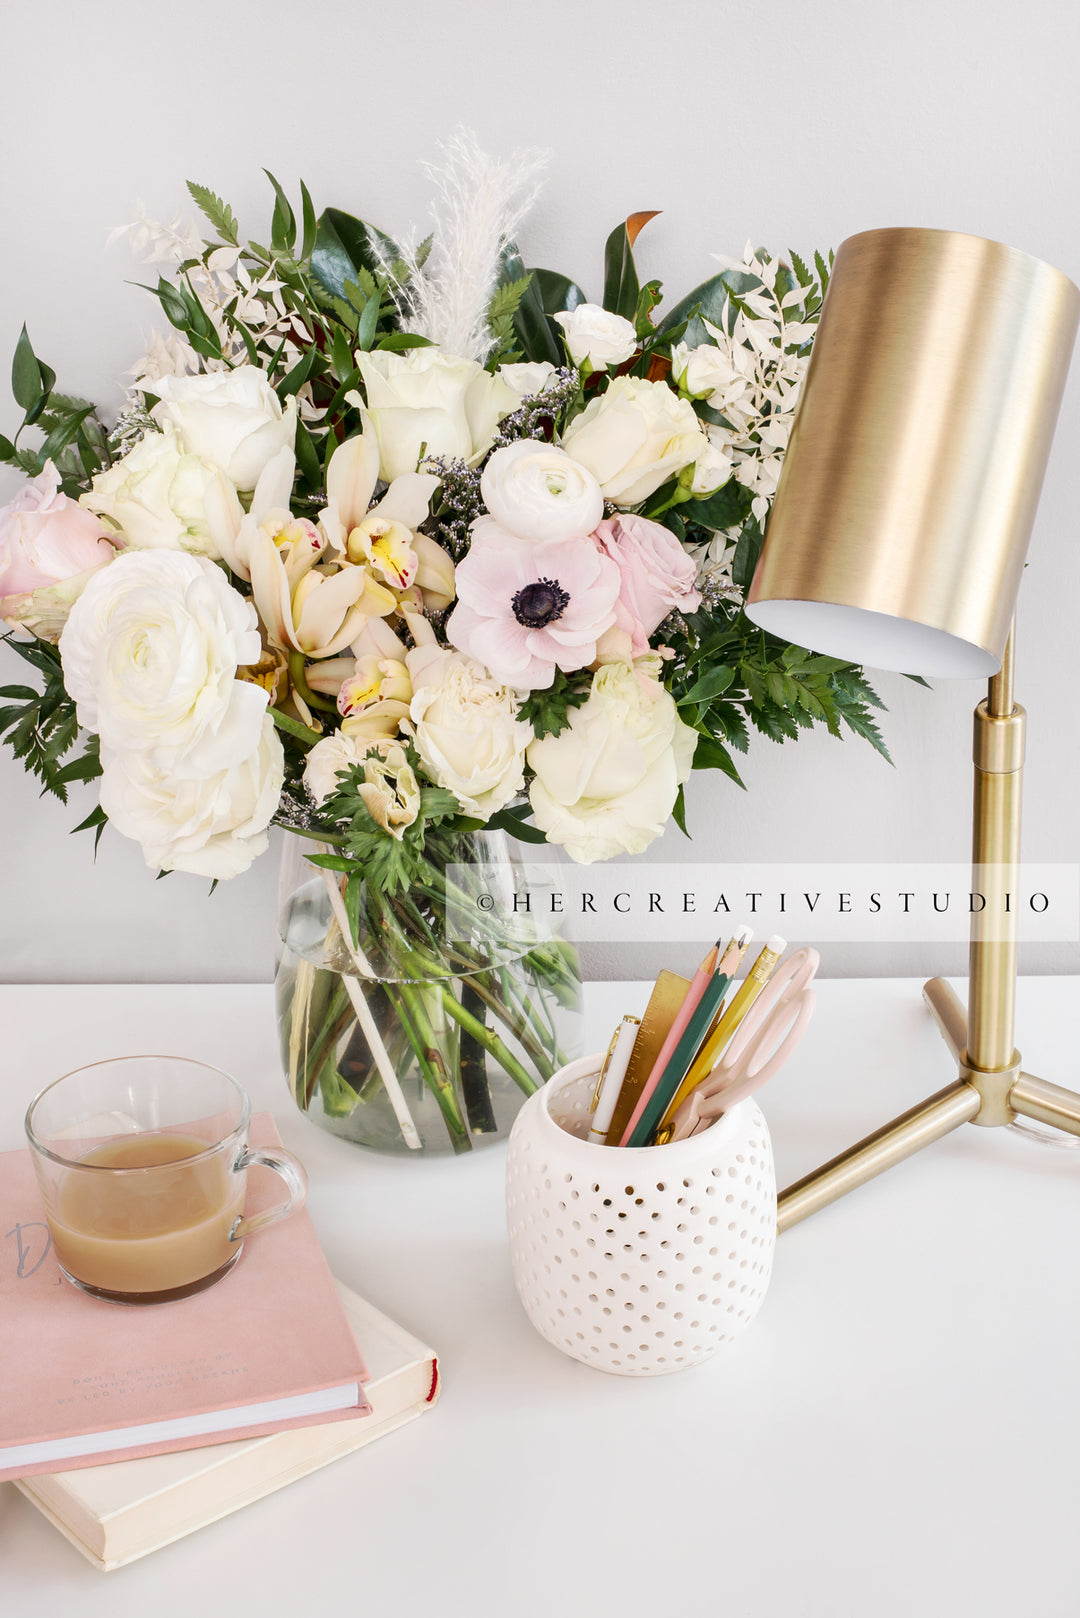 Flowers, Coffee & Gold Lamp on Workspace, Styled Stock Image